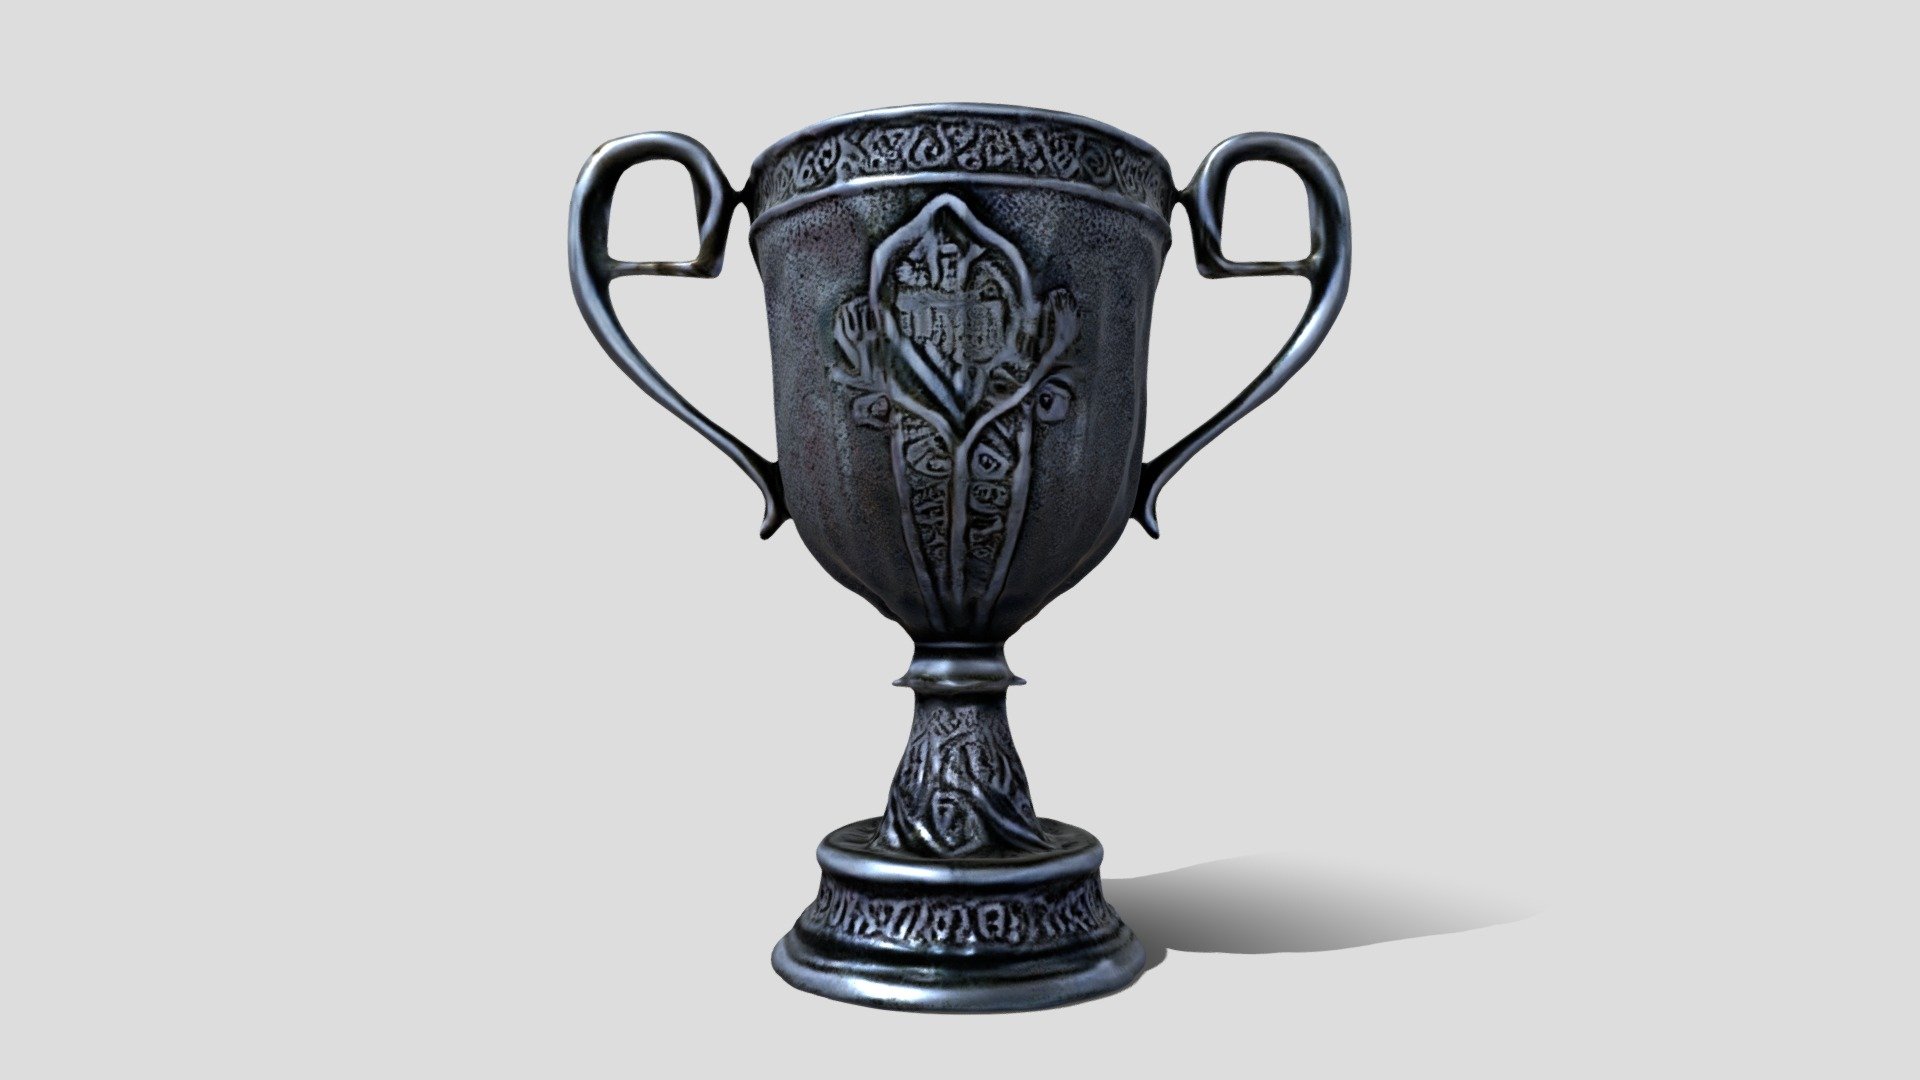 AMC69-ABCD Gold Trophy Cup - Free Engraving